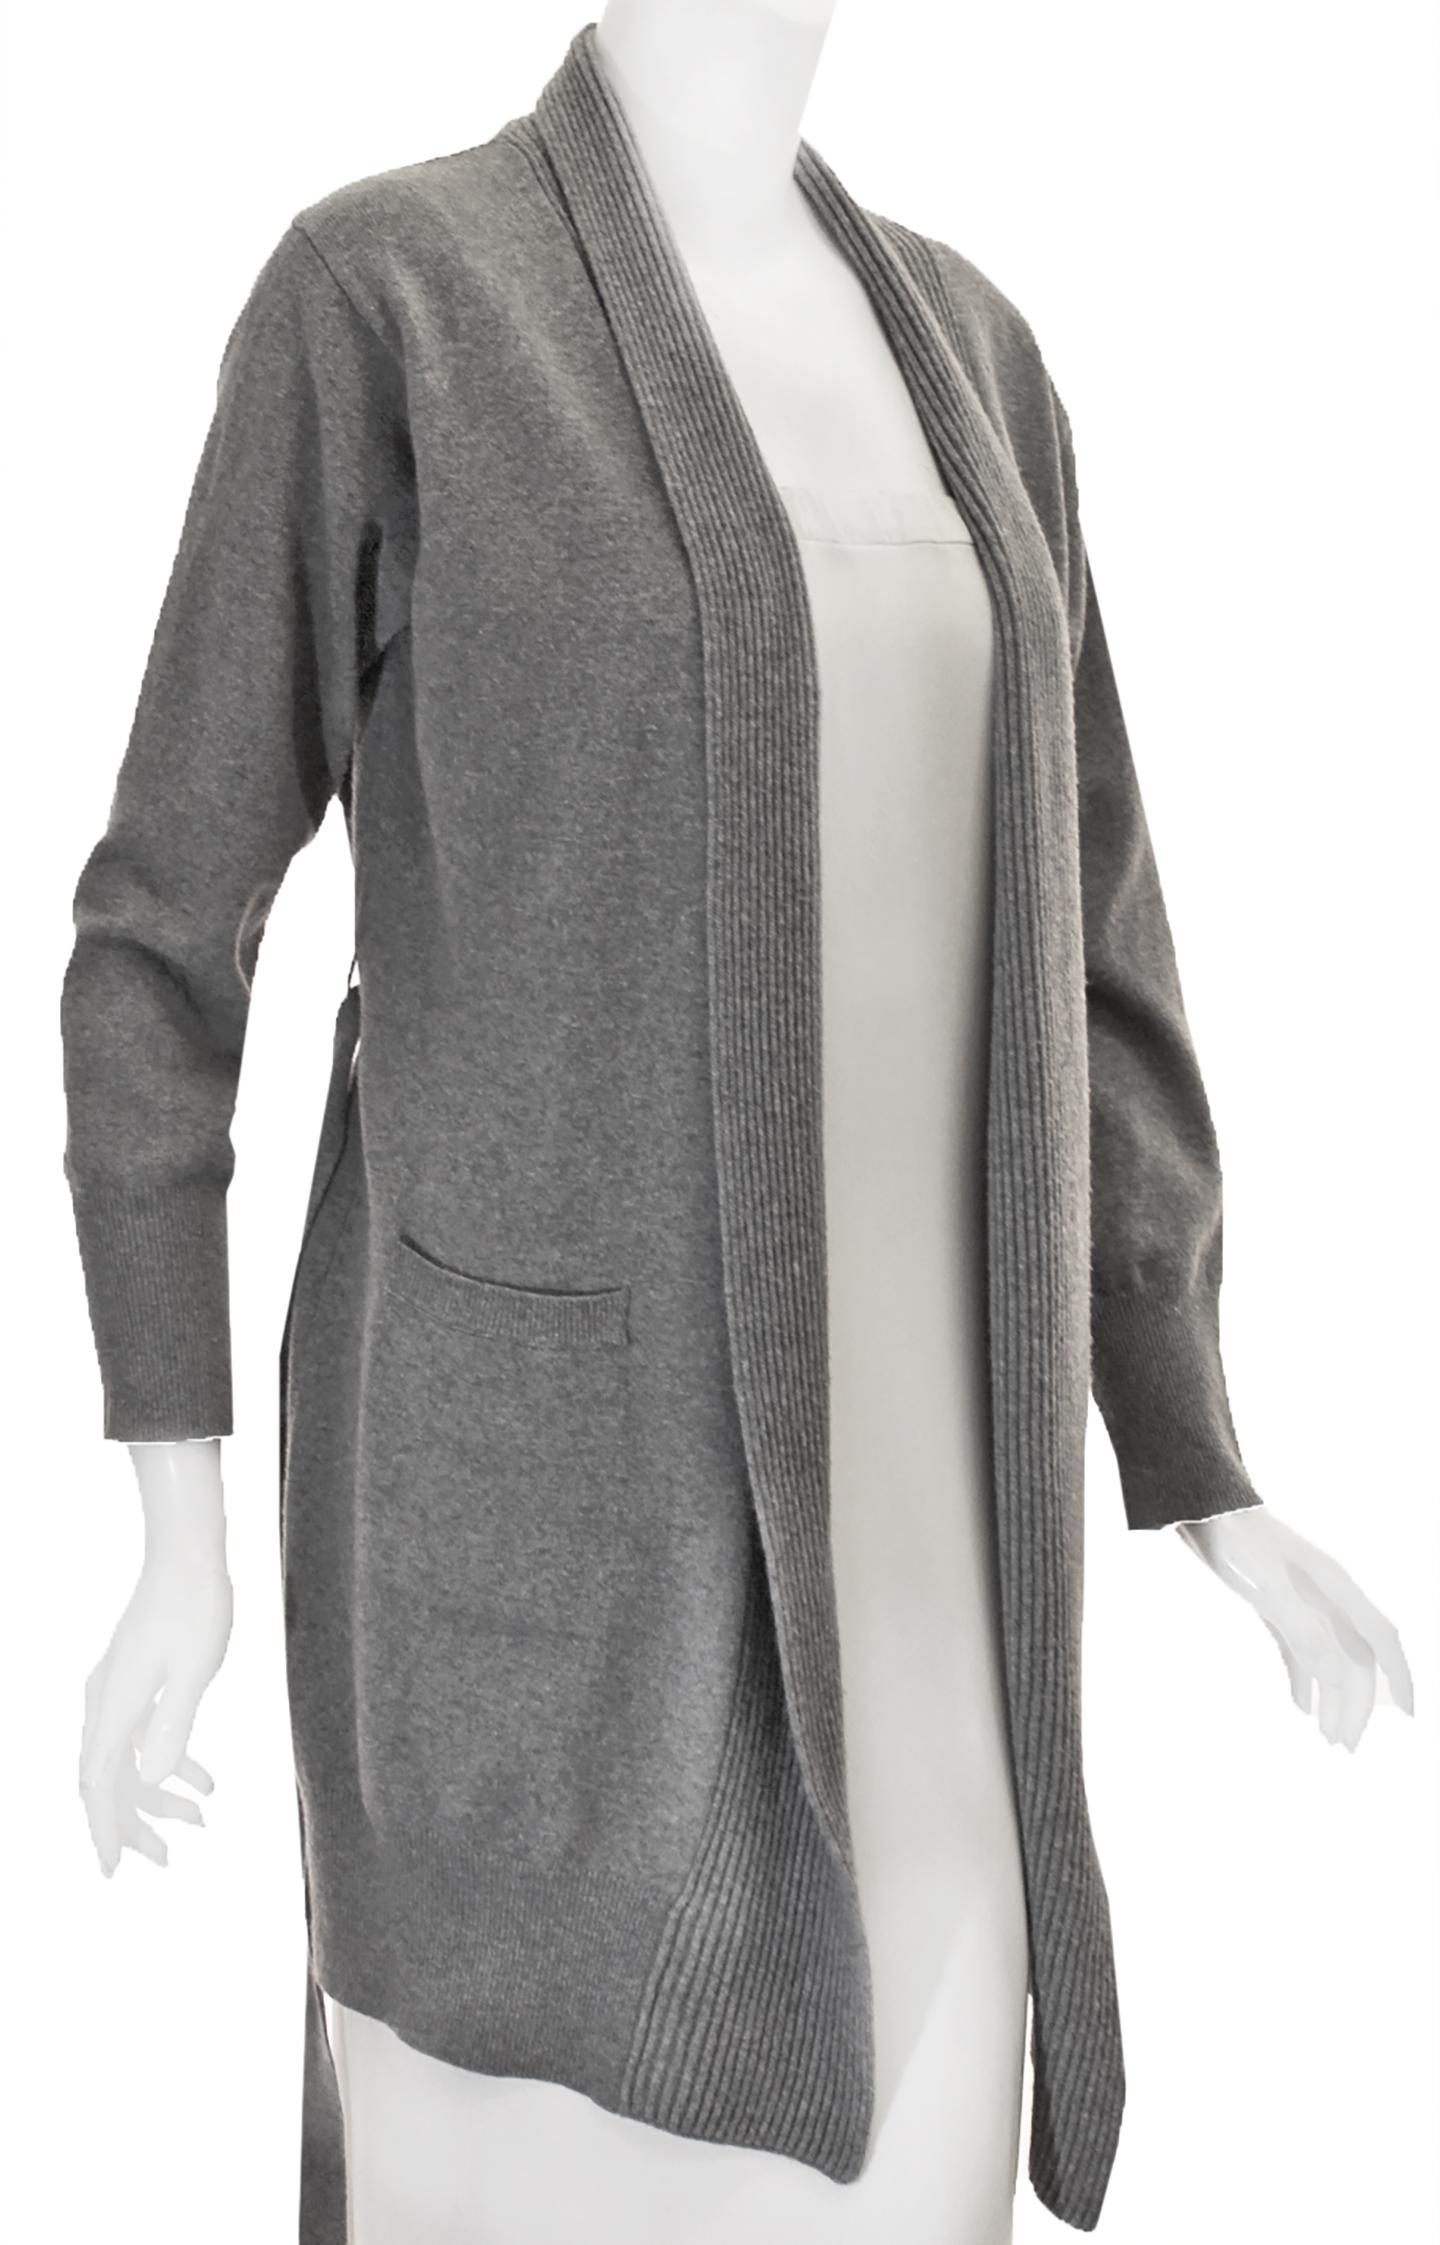 La Perla, the famous italian lingerie house, also designs casual easy to wear clothing.  This sweater jacket is composed of soft lightweight Merino wool, perfect for the transitional season that is rapidly approaching.  This sweater in light grey is